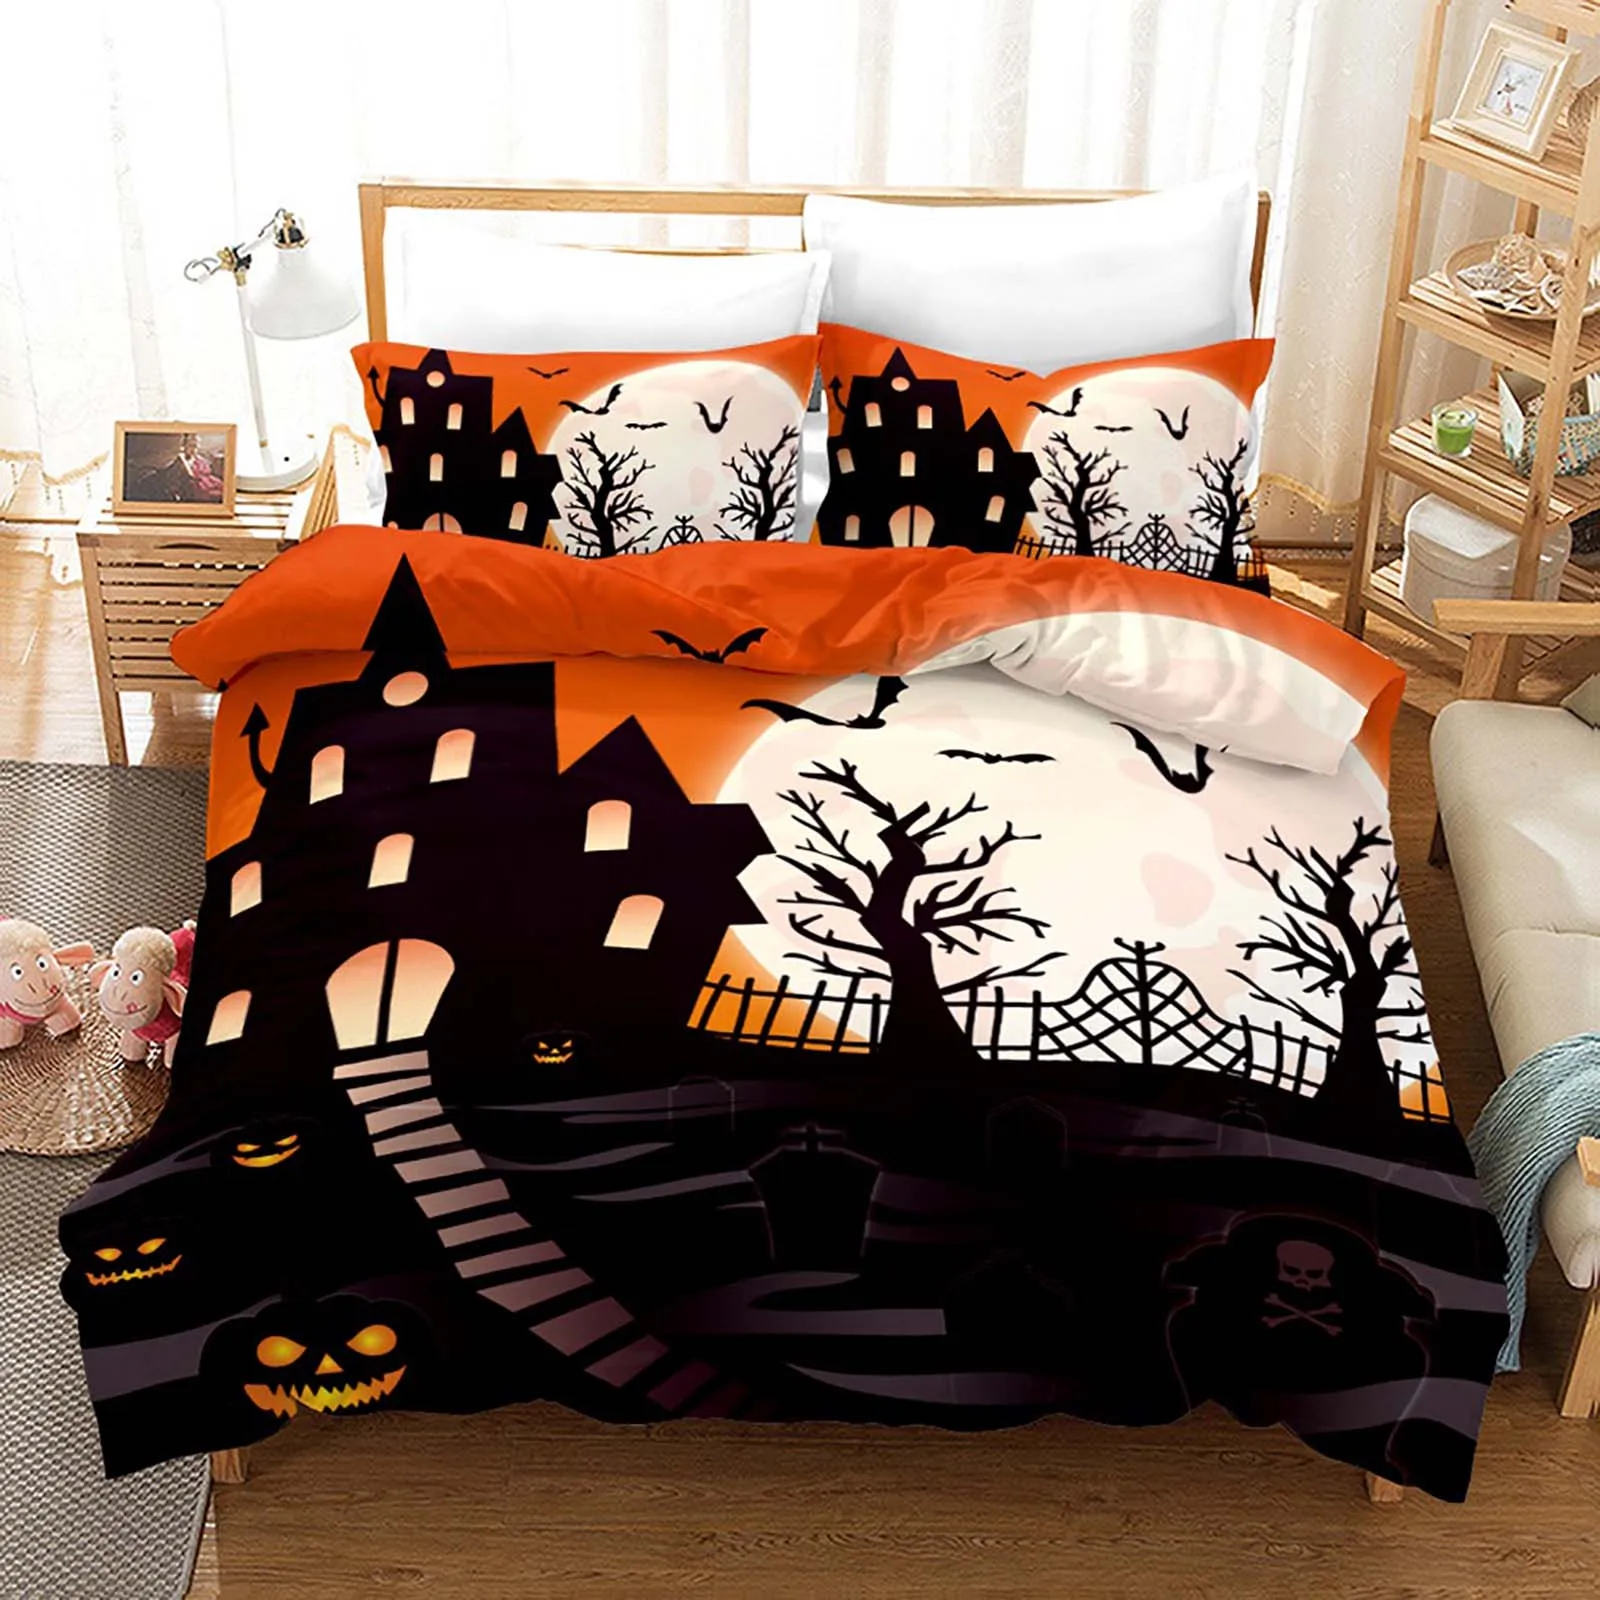 

Bedding Set Halloween Style Duvet Cover Single Double Full Queen King Size Quilt Cover Pillowcase Decor Bedclothes Size 200x200